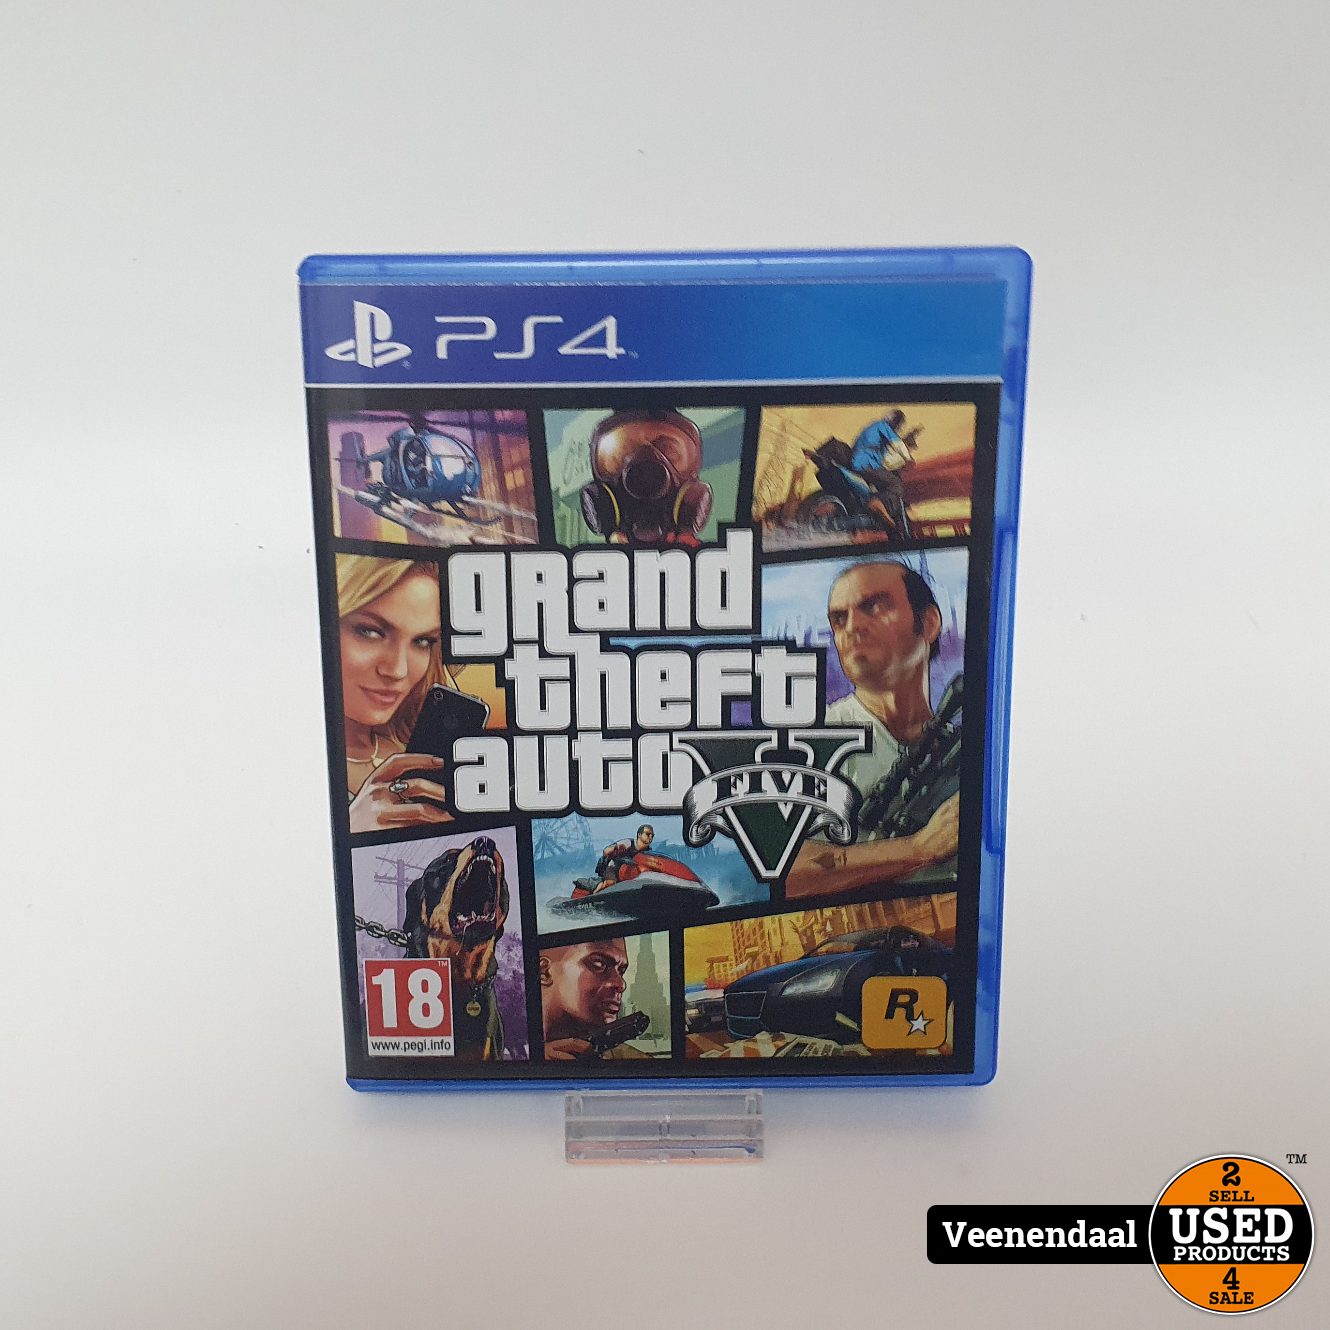 PS4 Game: Theft Auto 5 in Nette Staat - Used Products Veenendaal